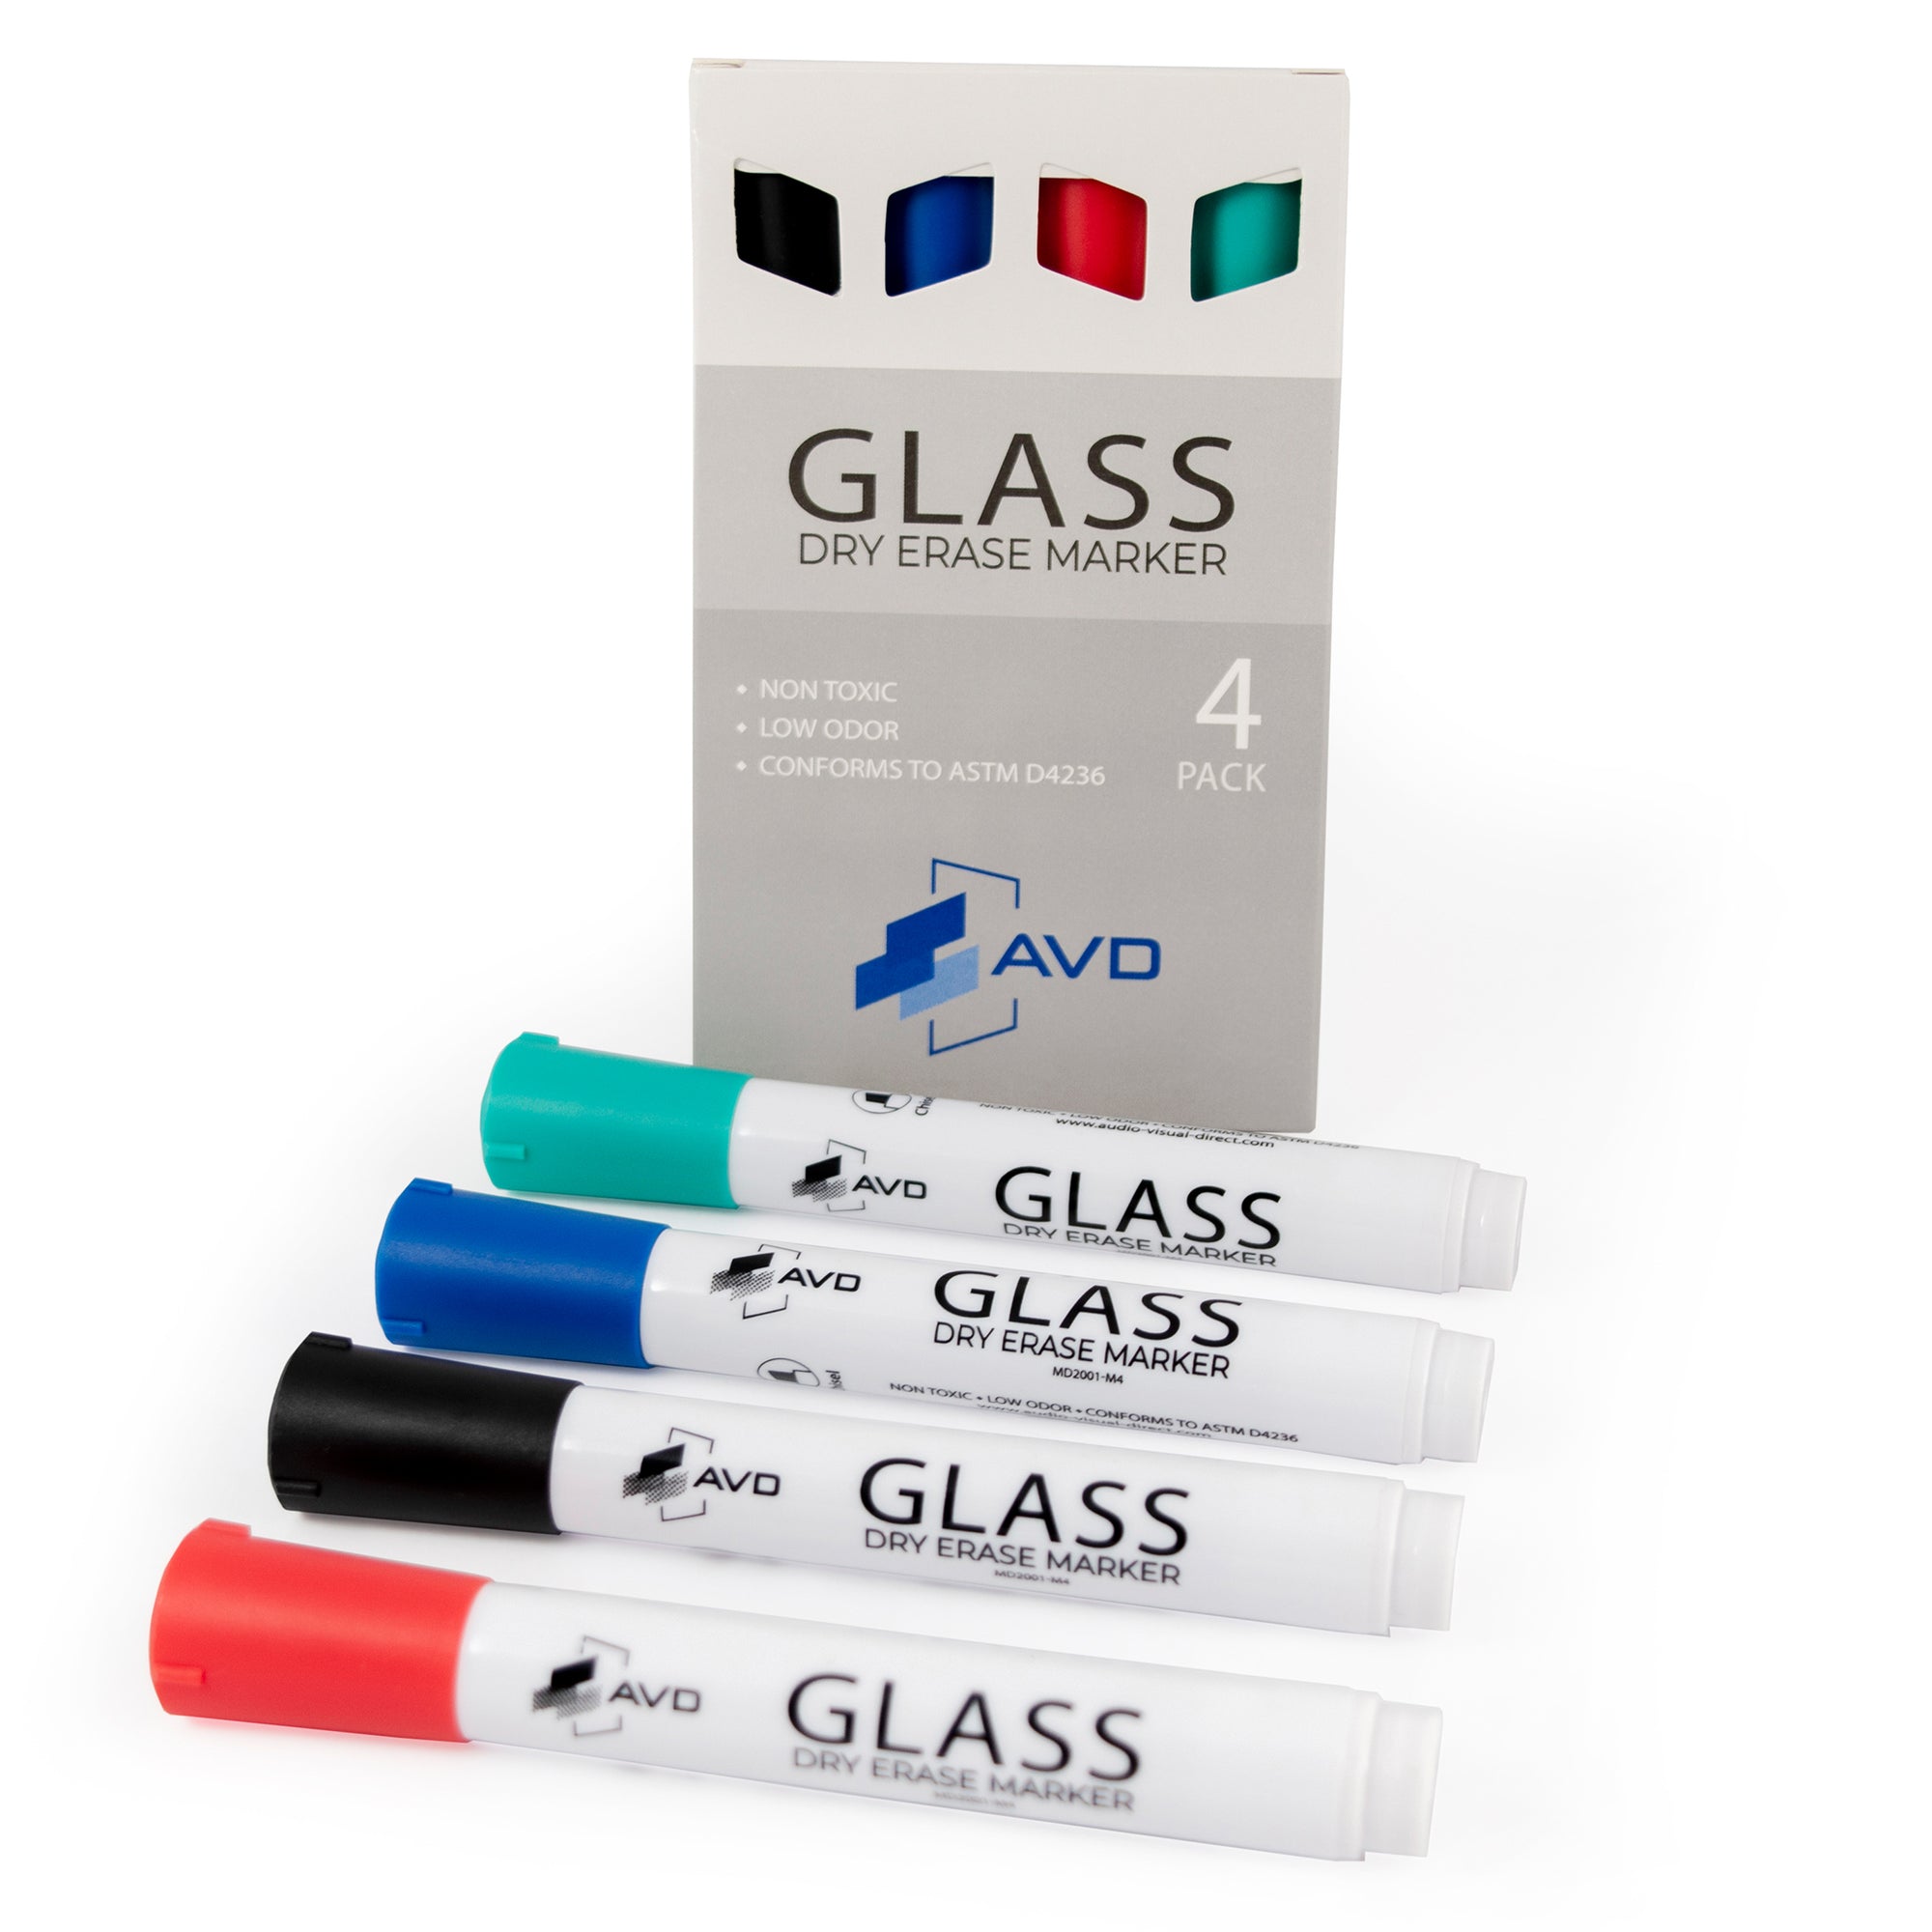 Audio Visual Direct Dry Erase Markers For Glass Boards, Set of 4 (Red, Blue, Green, Black) 